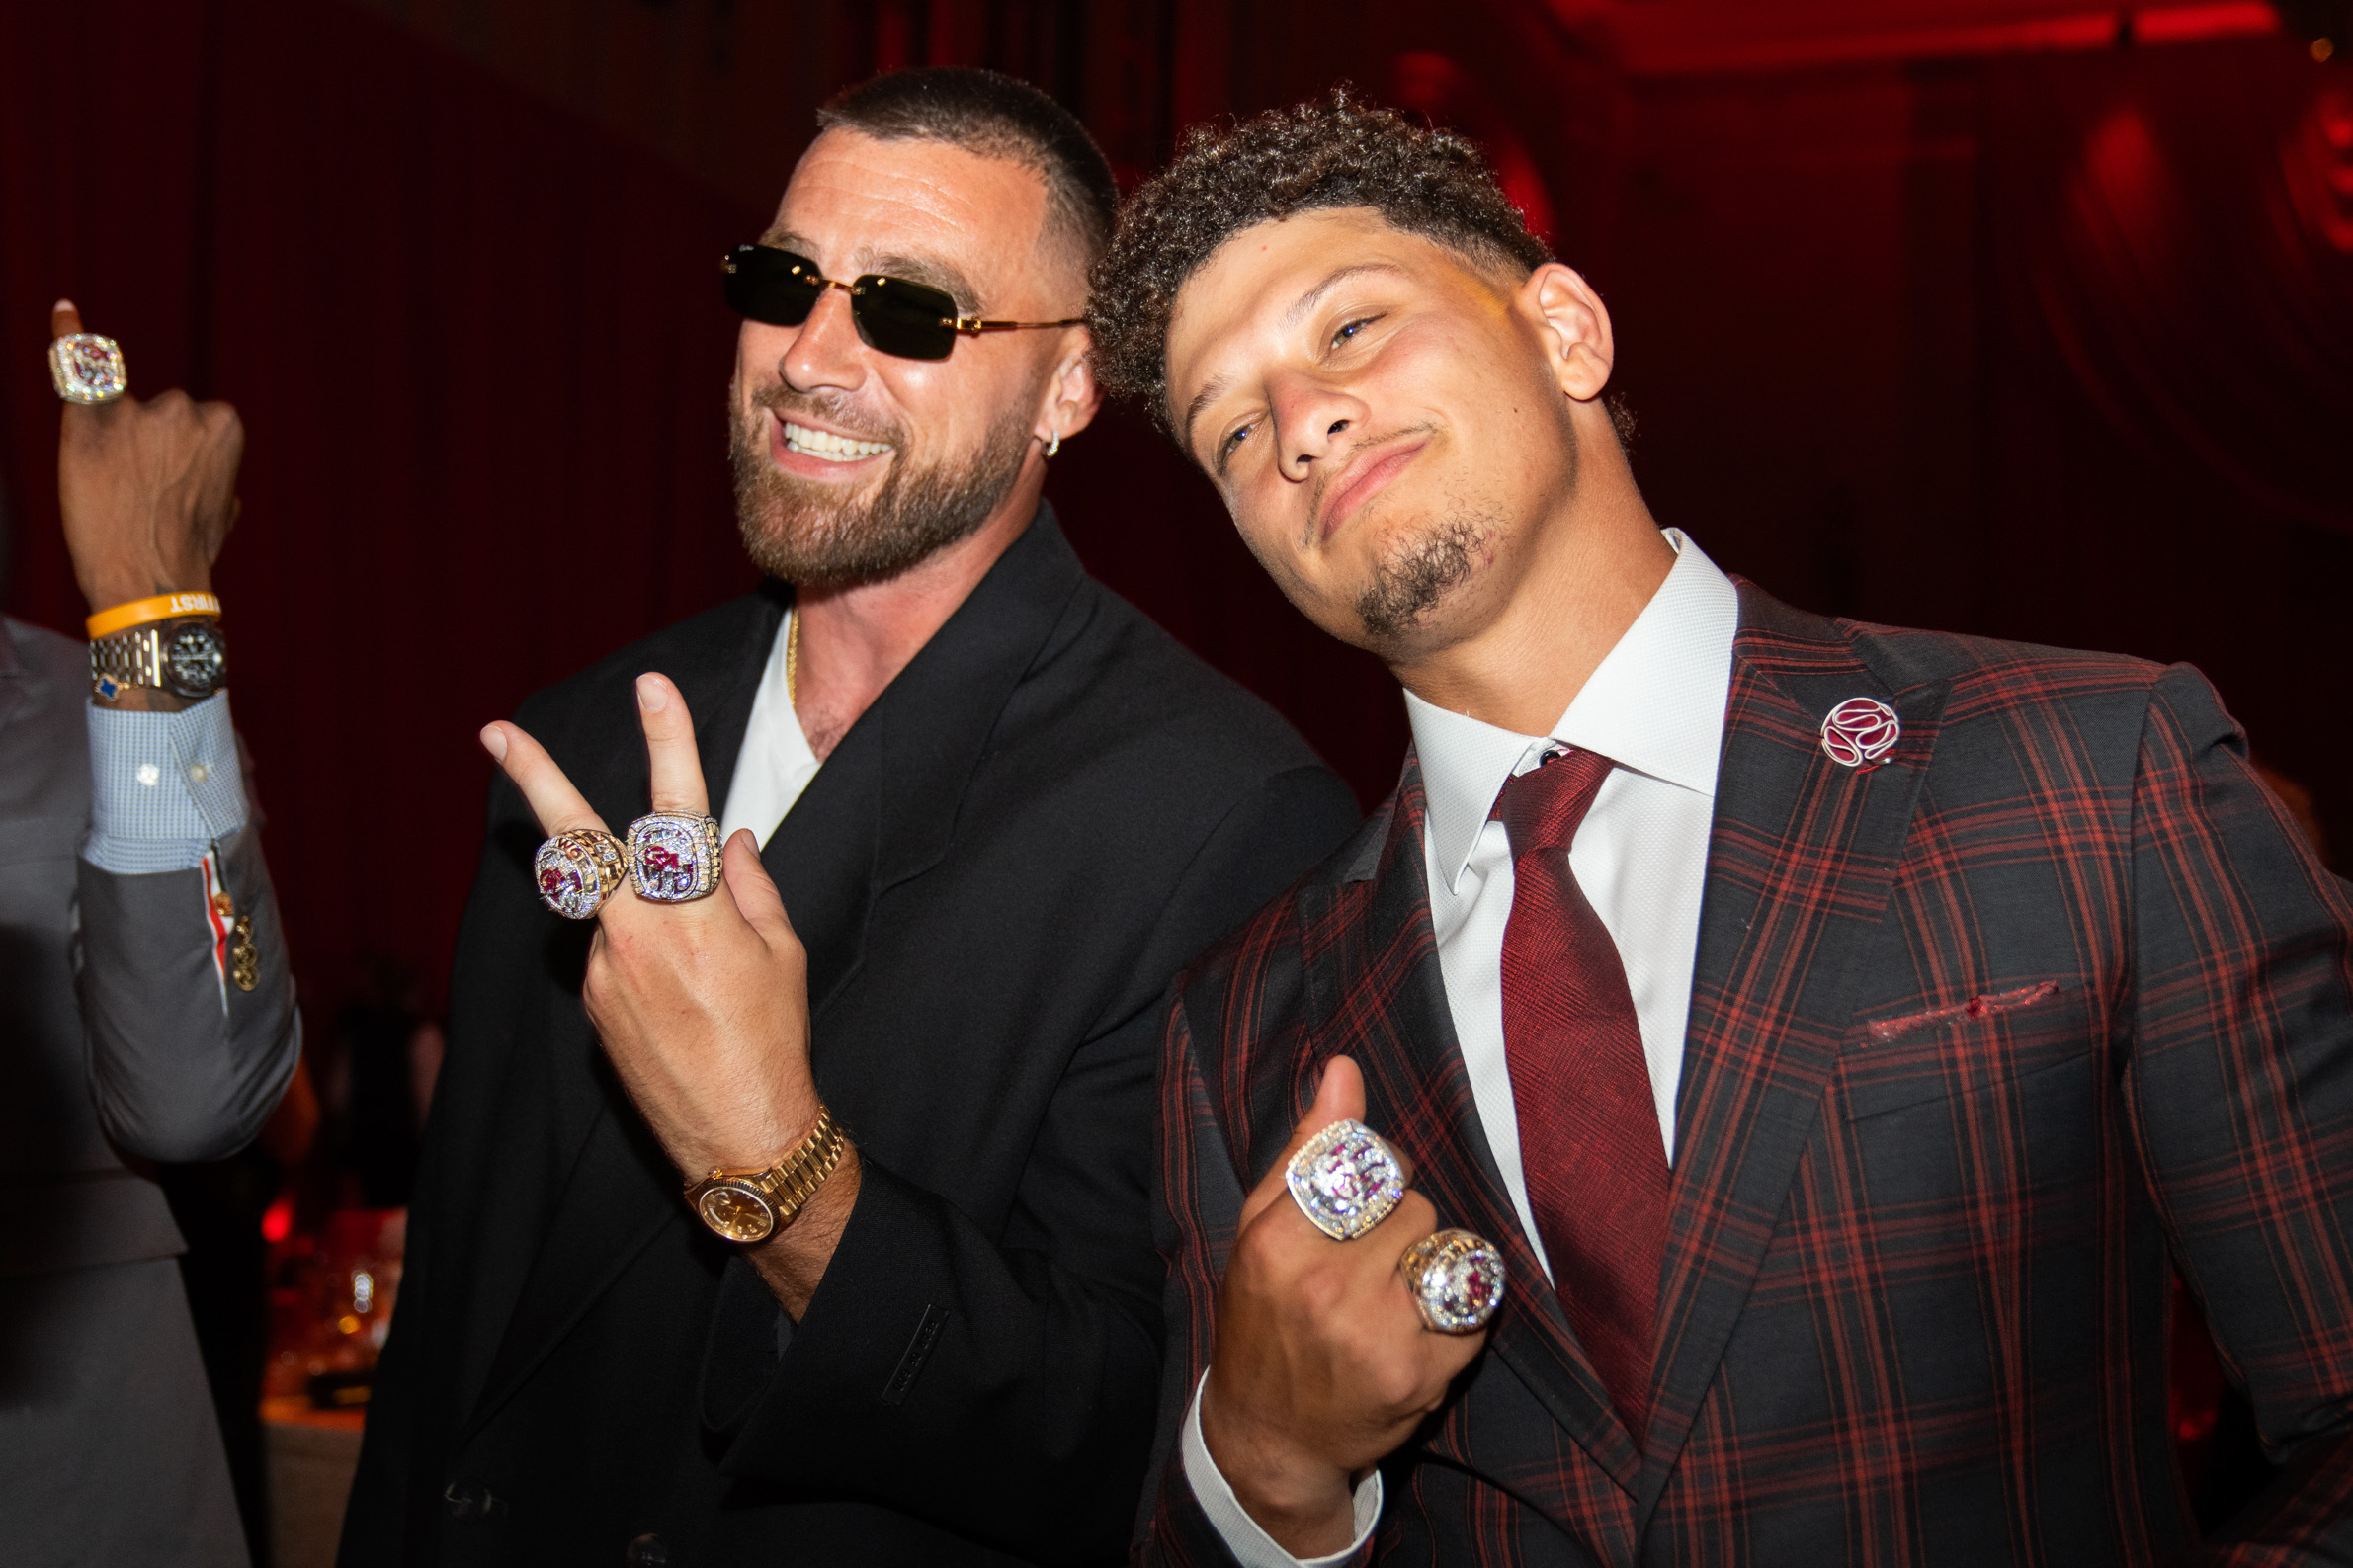 Patrick Mahomes says Taylor Swift ‘attention’ hasn’t changed Travis Kelce: ‘He’s just been himself’